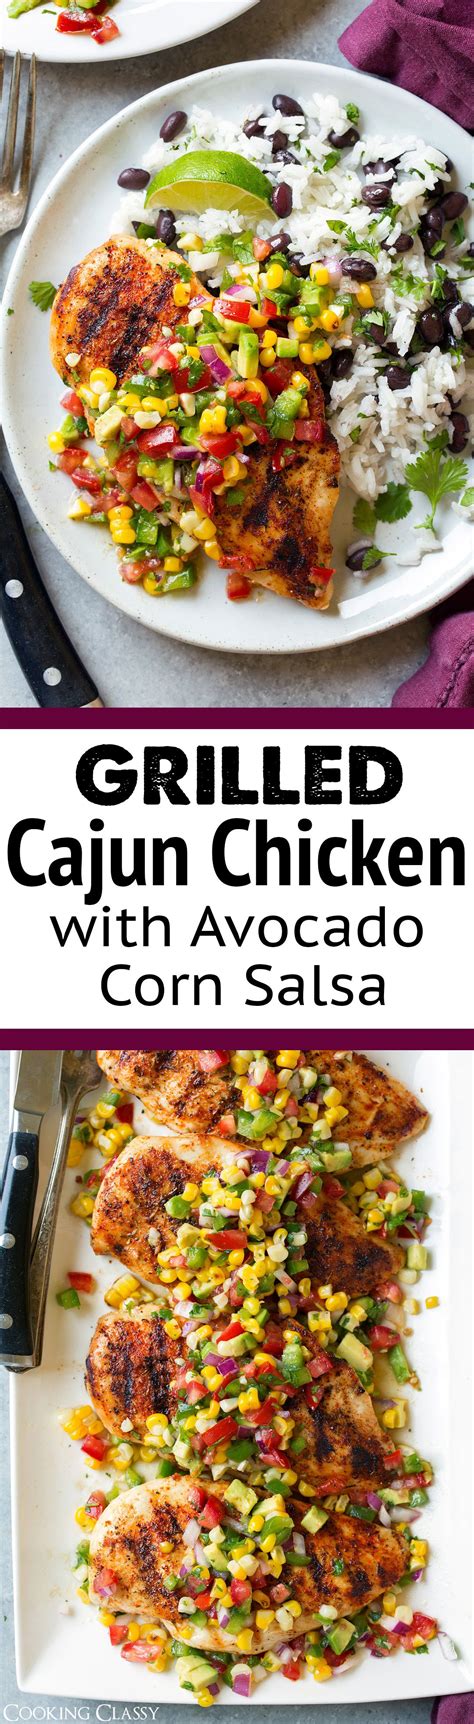 Grilled Cajun Chicken With Avocado Corn Salsa Cooking Classy With Images Avocado Corn